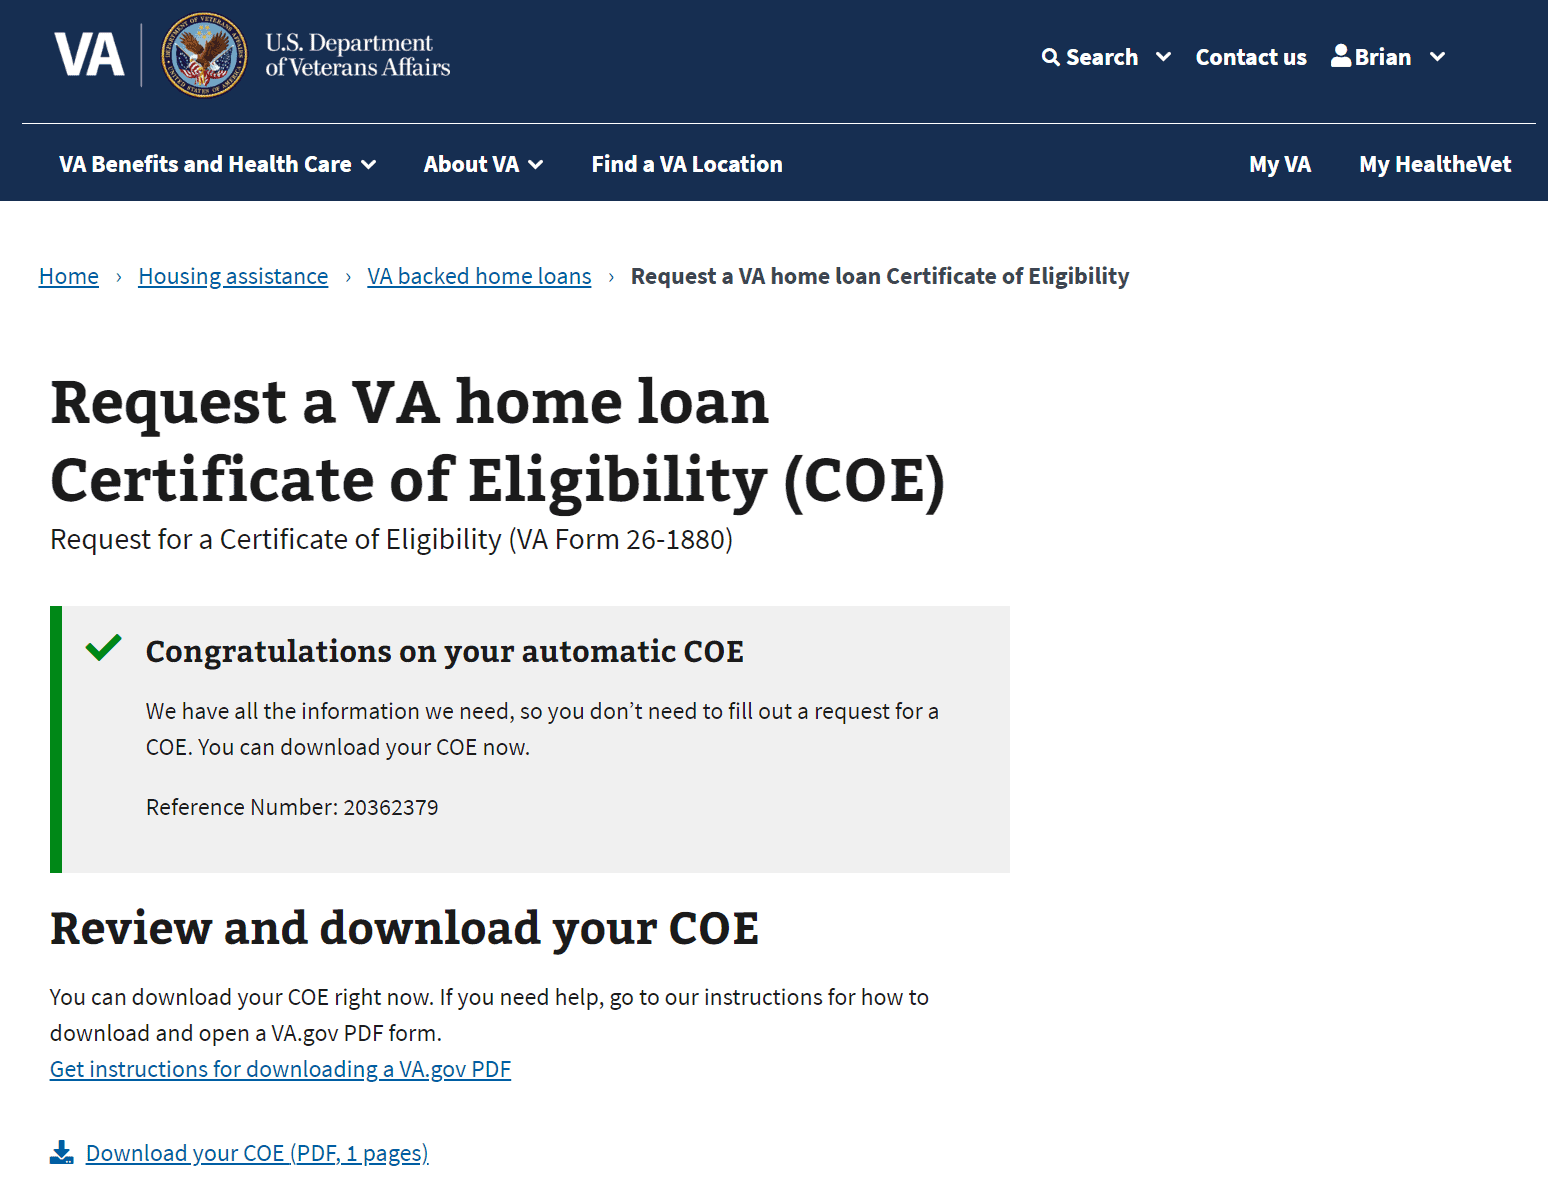 Step #3: Download Your Autogenerated VA COE Form Online